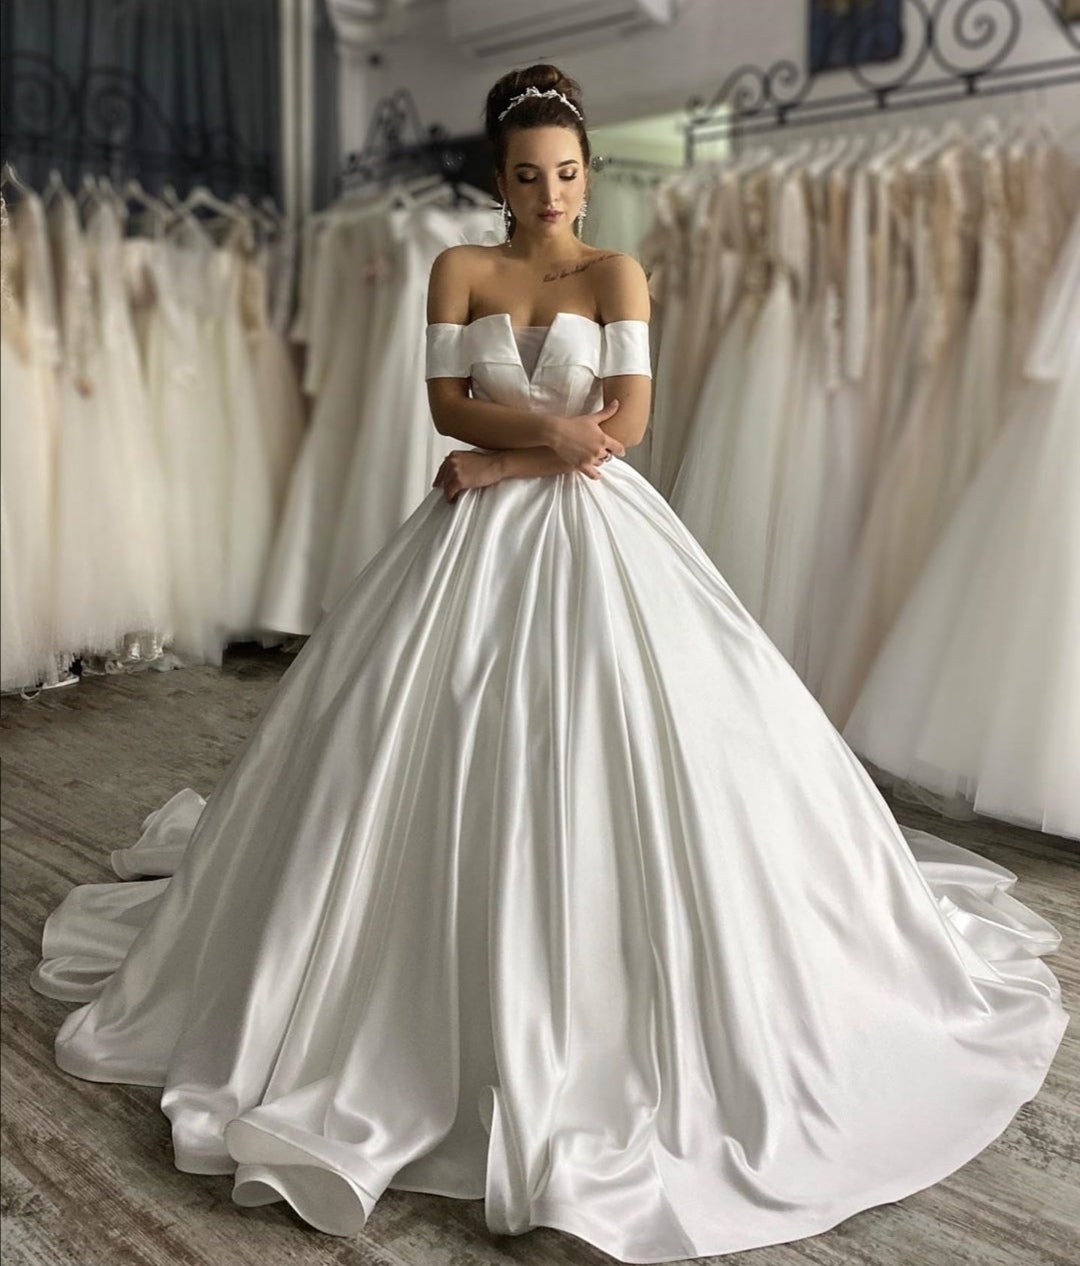 structured-satin-ball-gown-wedding-dress-with-off-the-shoulder-sleeves-3